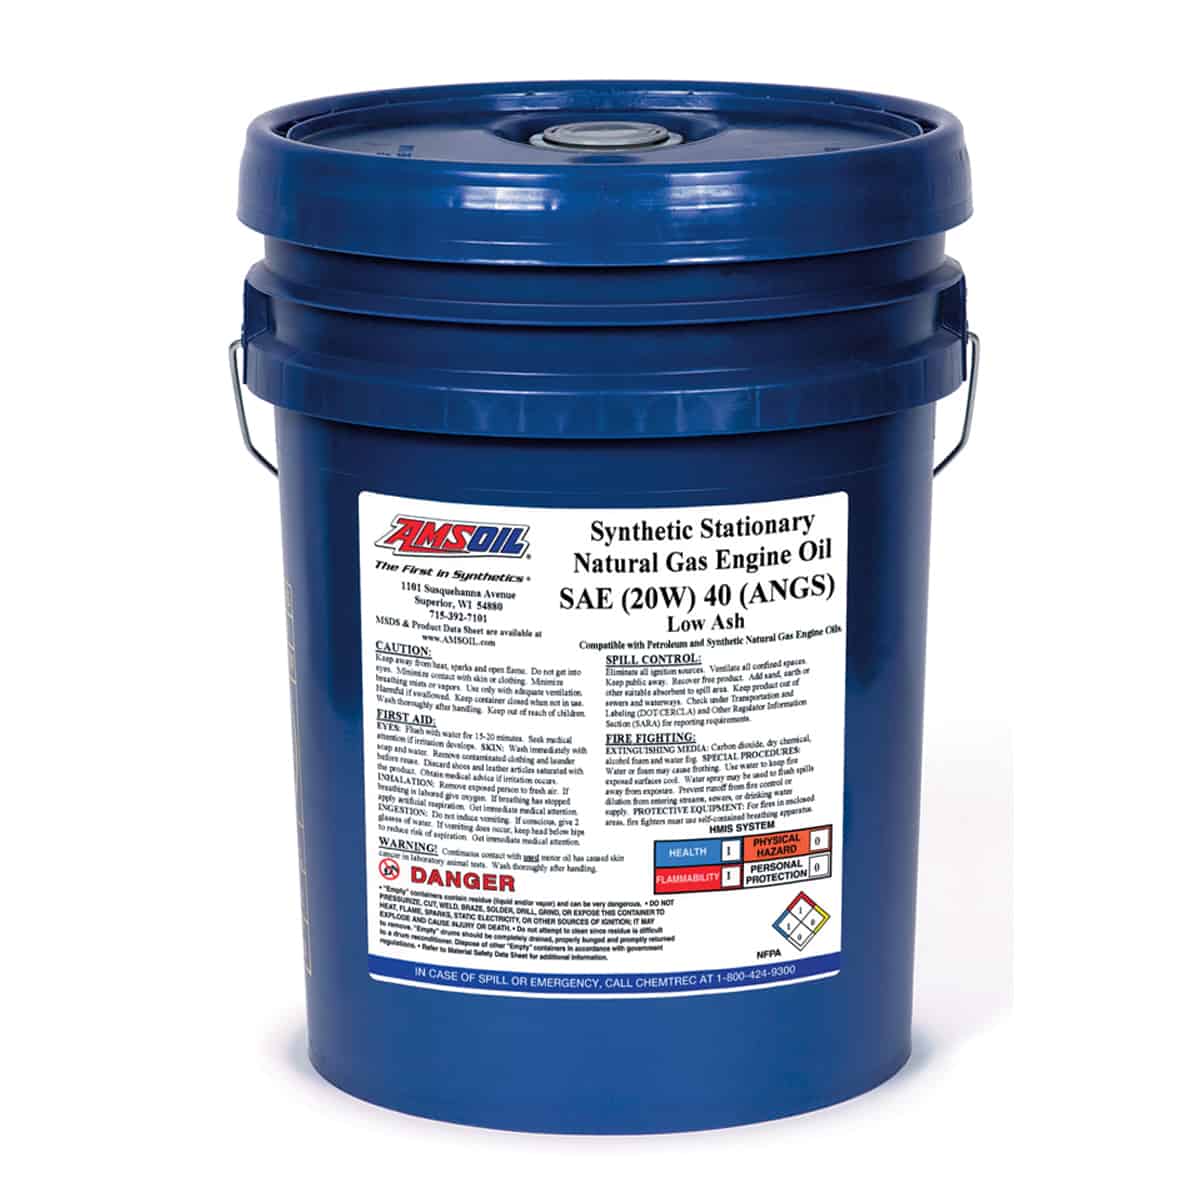 Synthetic Stationary Natural Gas Engine Oil SAE (20W) 40